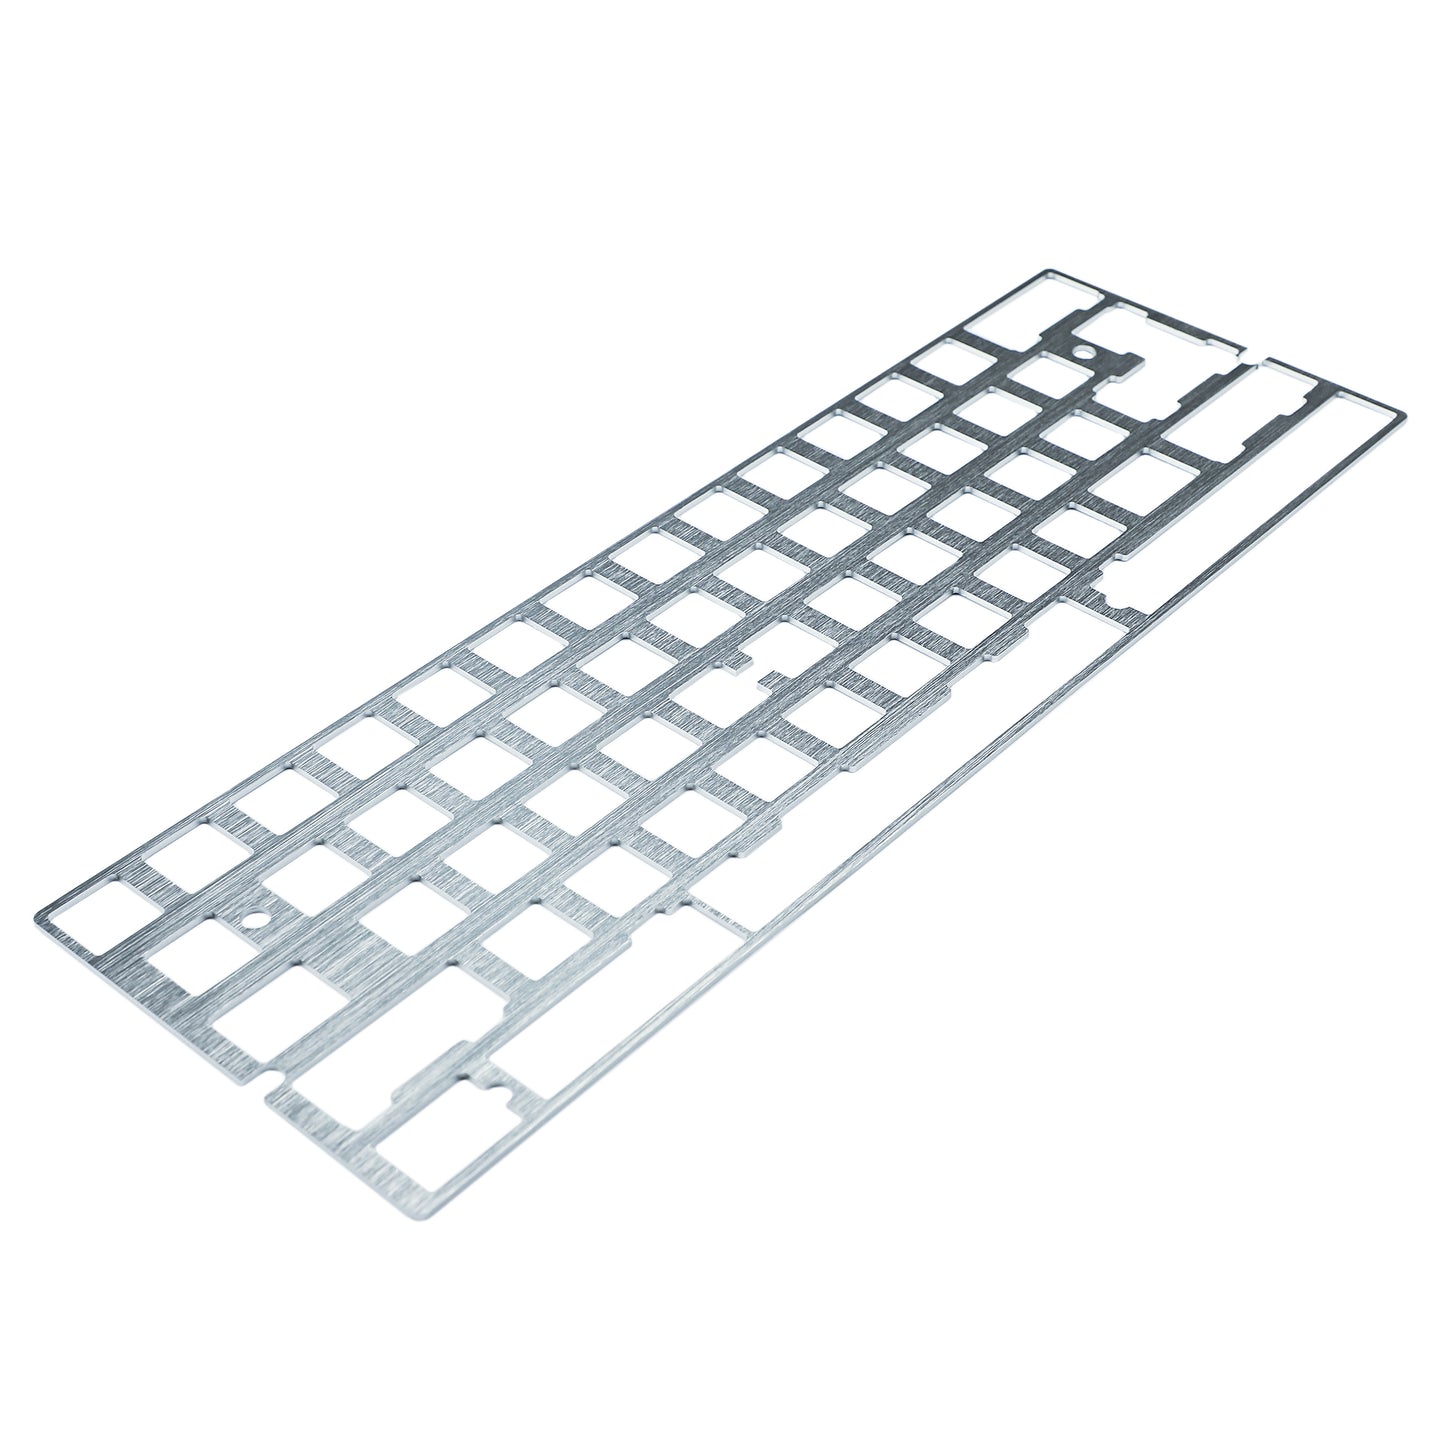 60% Aluminum/Brass/Steel Plate(DZ60 GH60 XD64 YD64MQ Using/Multi-Layout Supported)